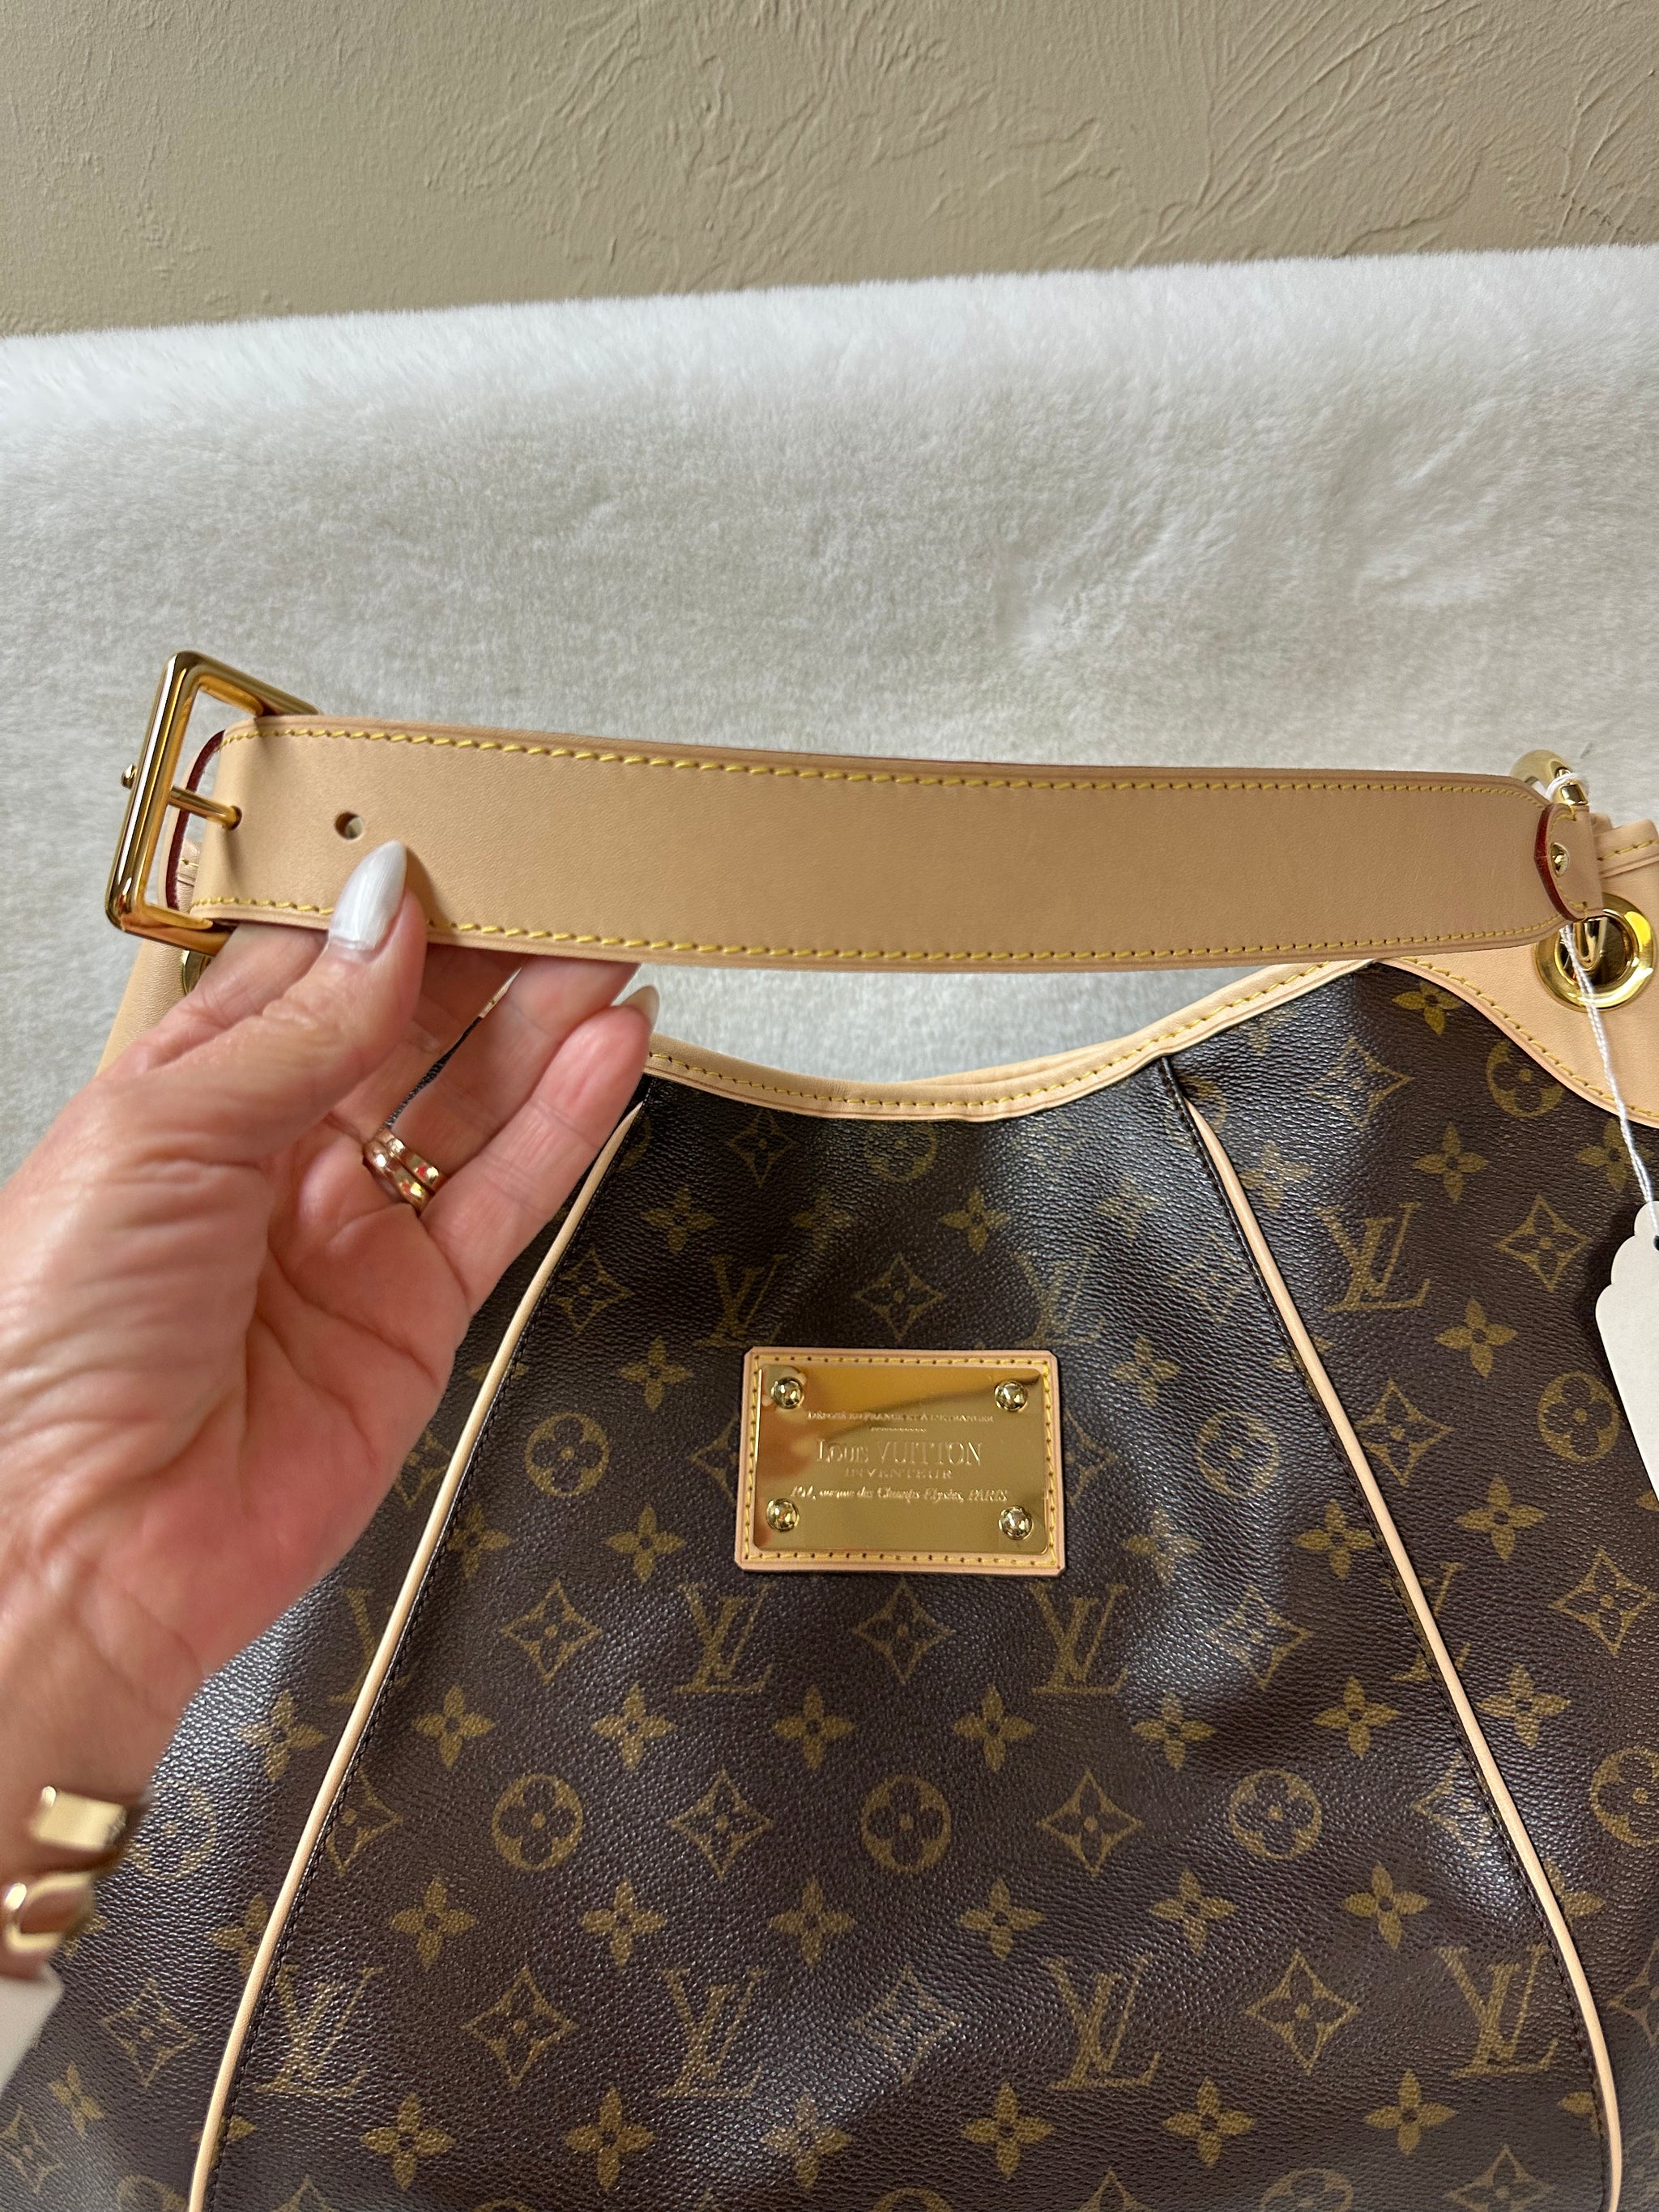 Just in… Louis Vuitton Bucket Bag - WHAT 2 WEAR of SWFL